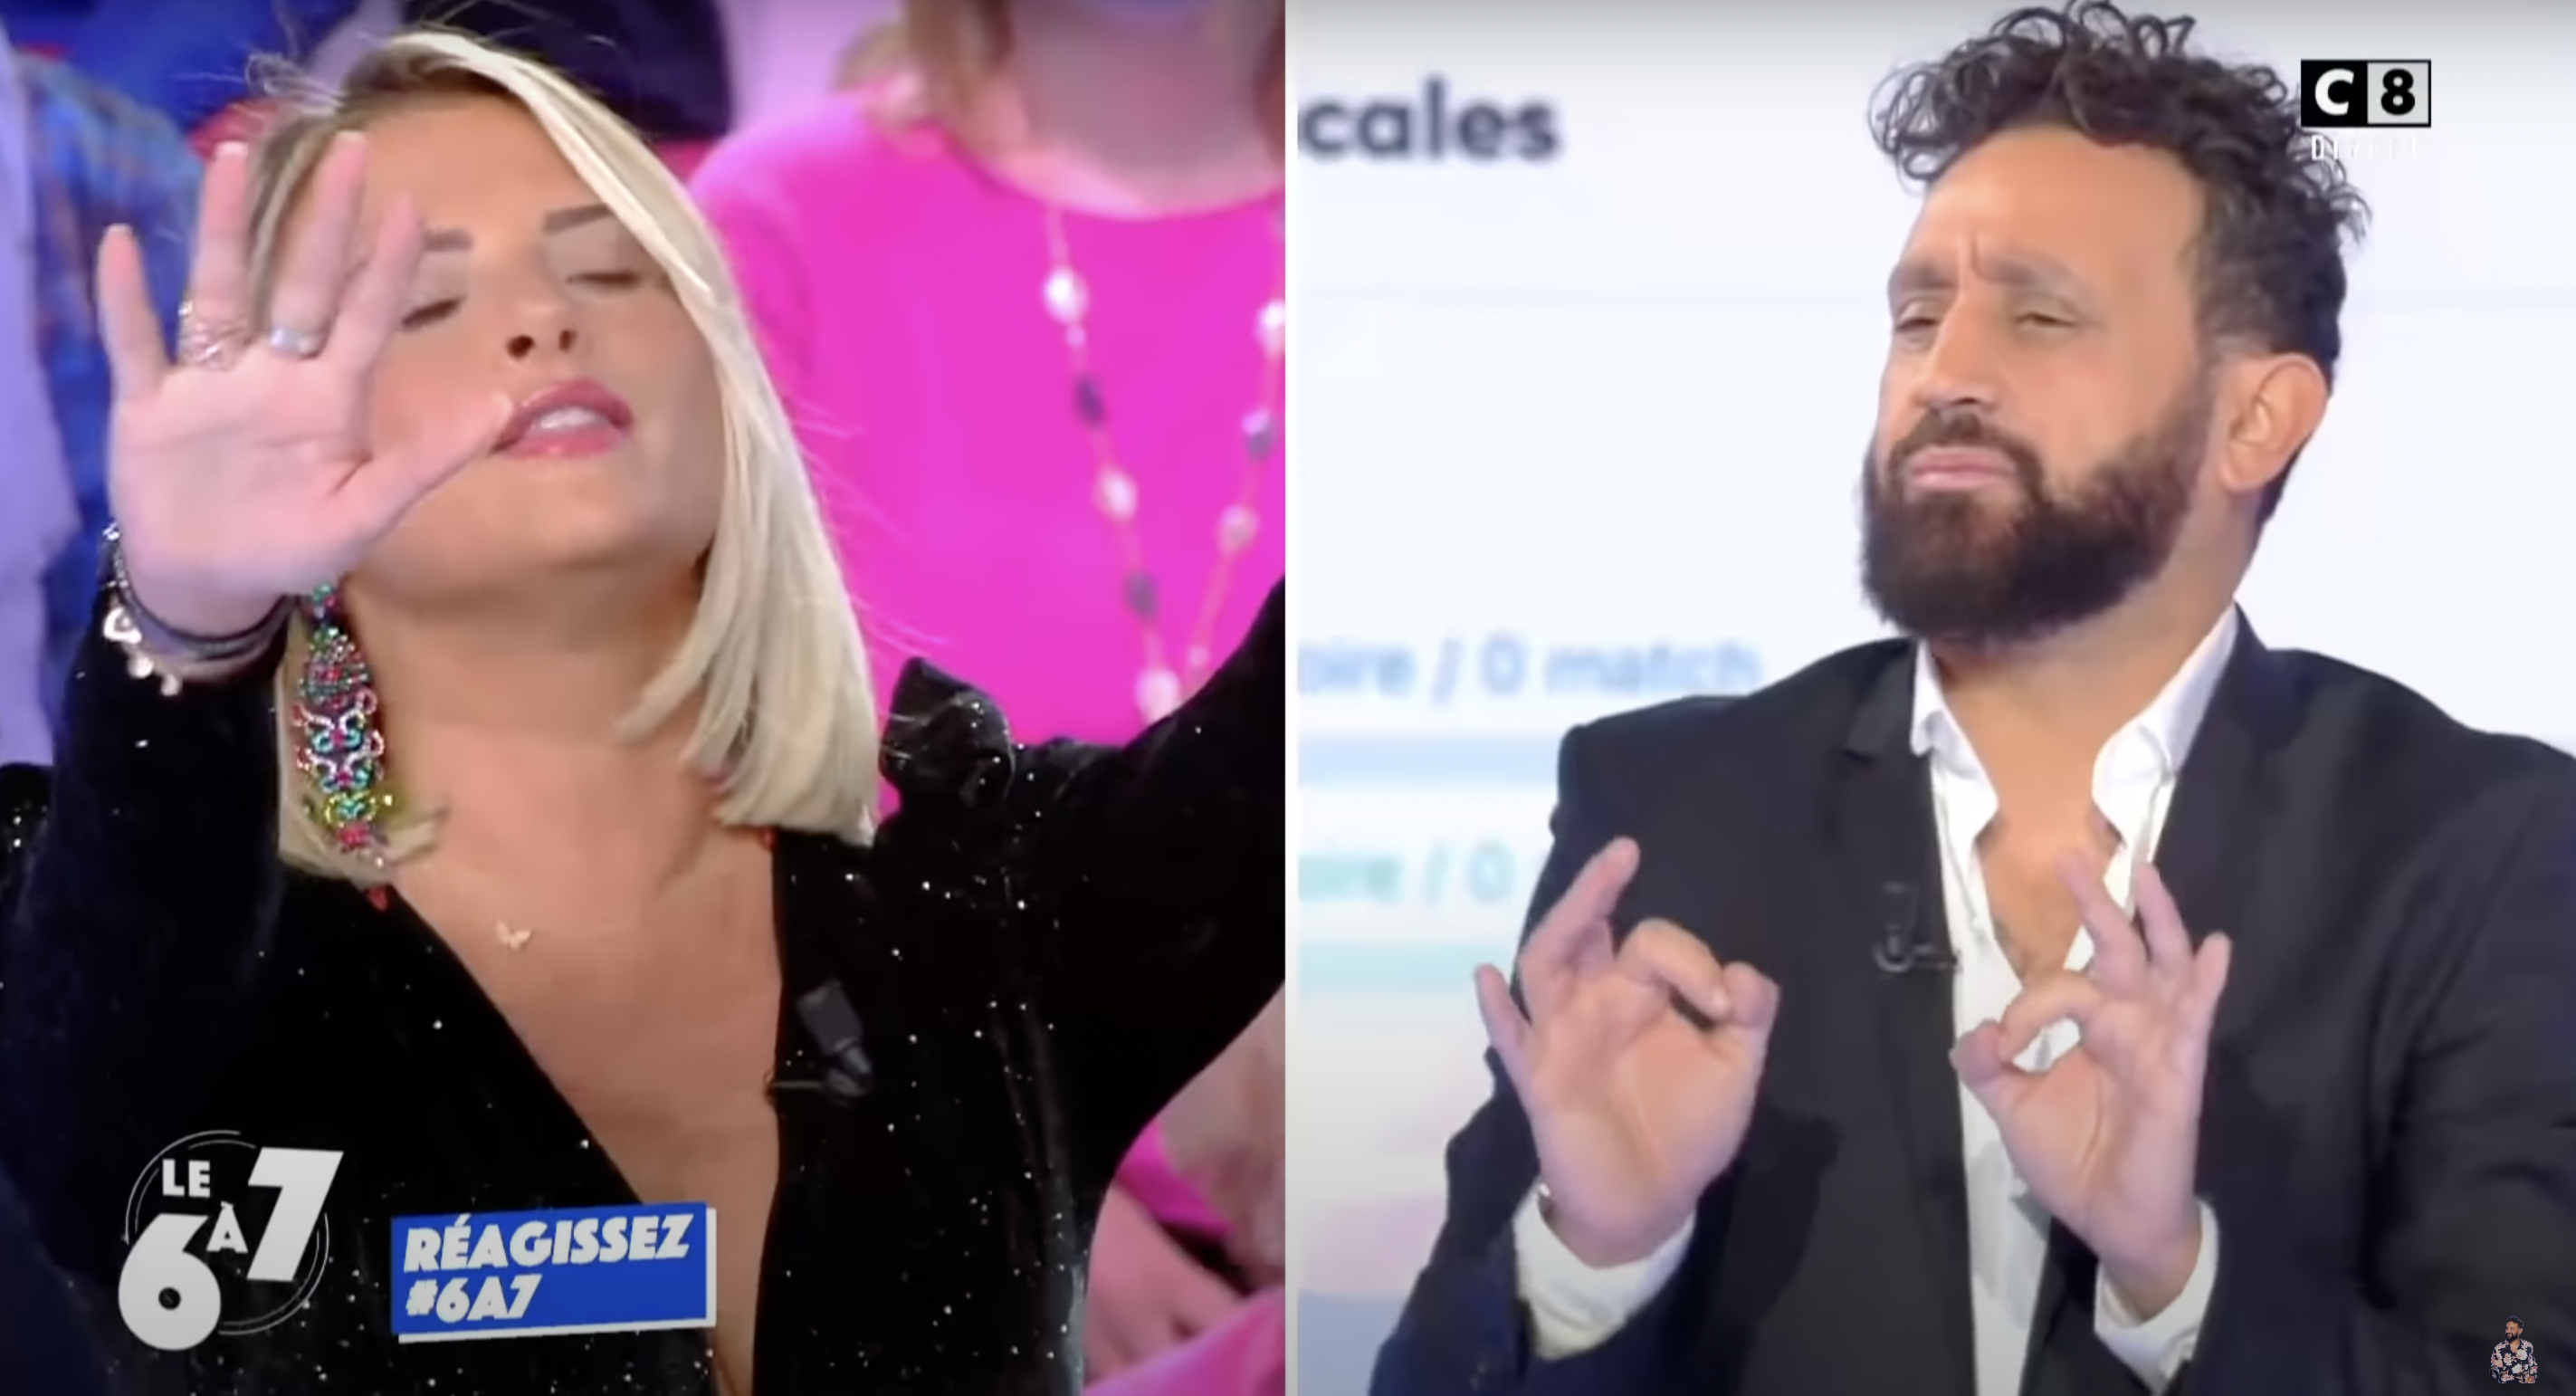 Kelly Vedovelli questions the classification of Cyril Hanouna